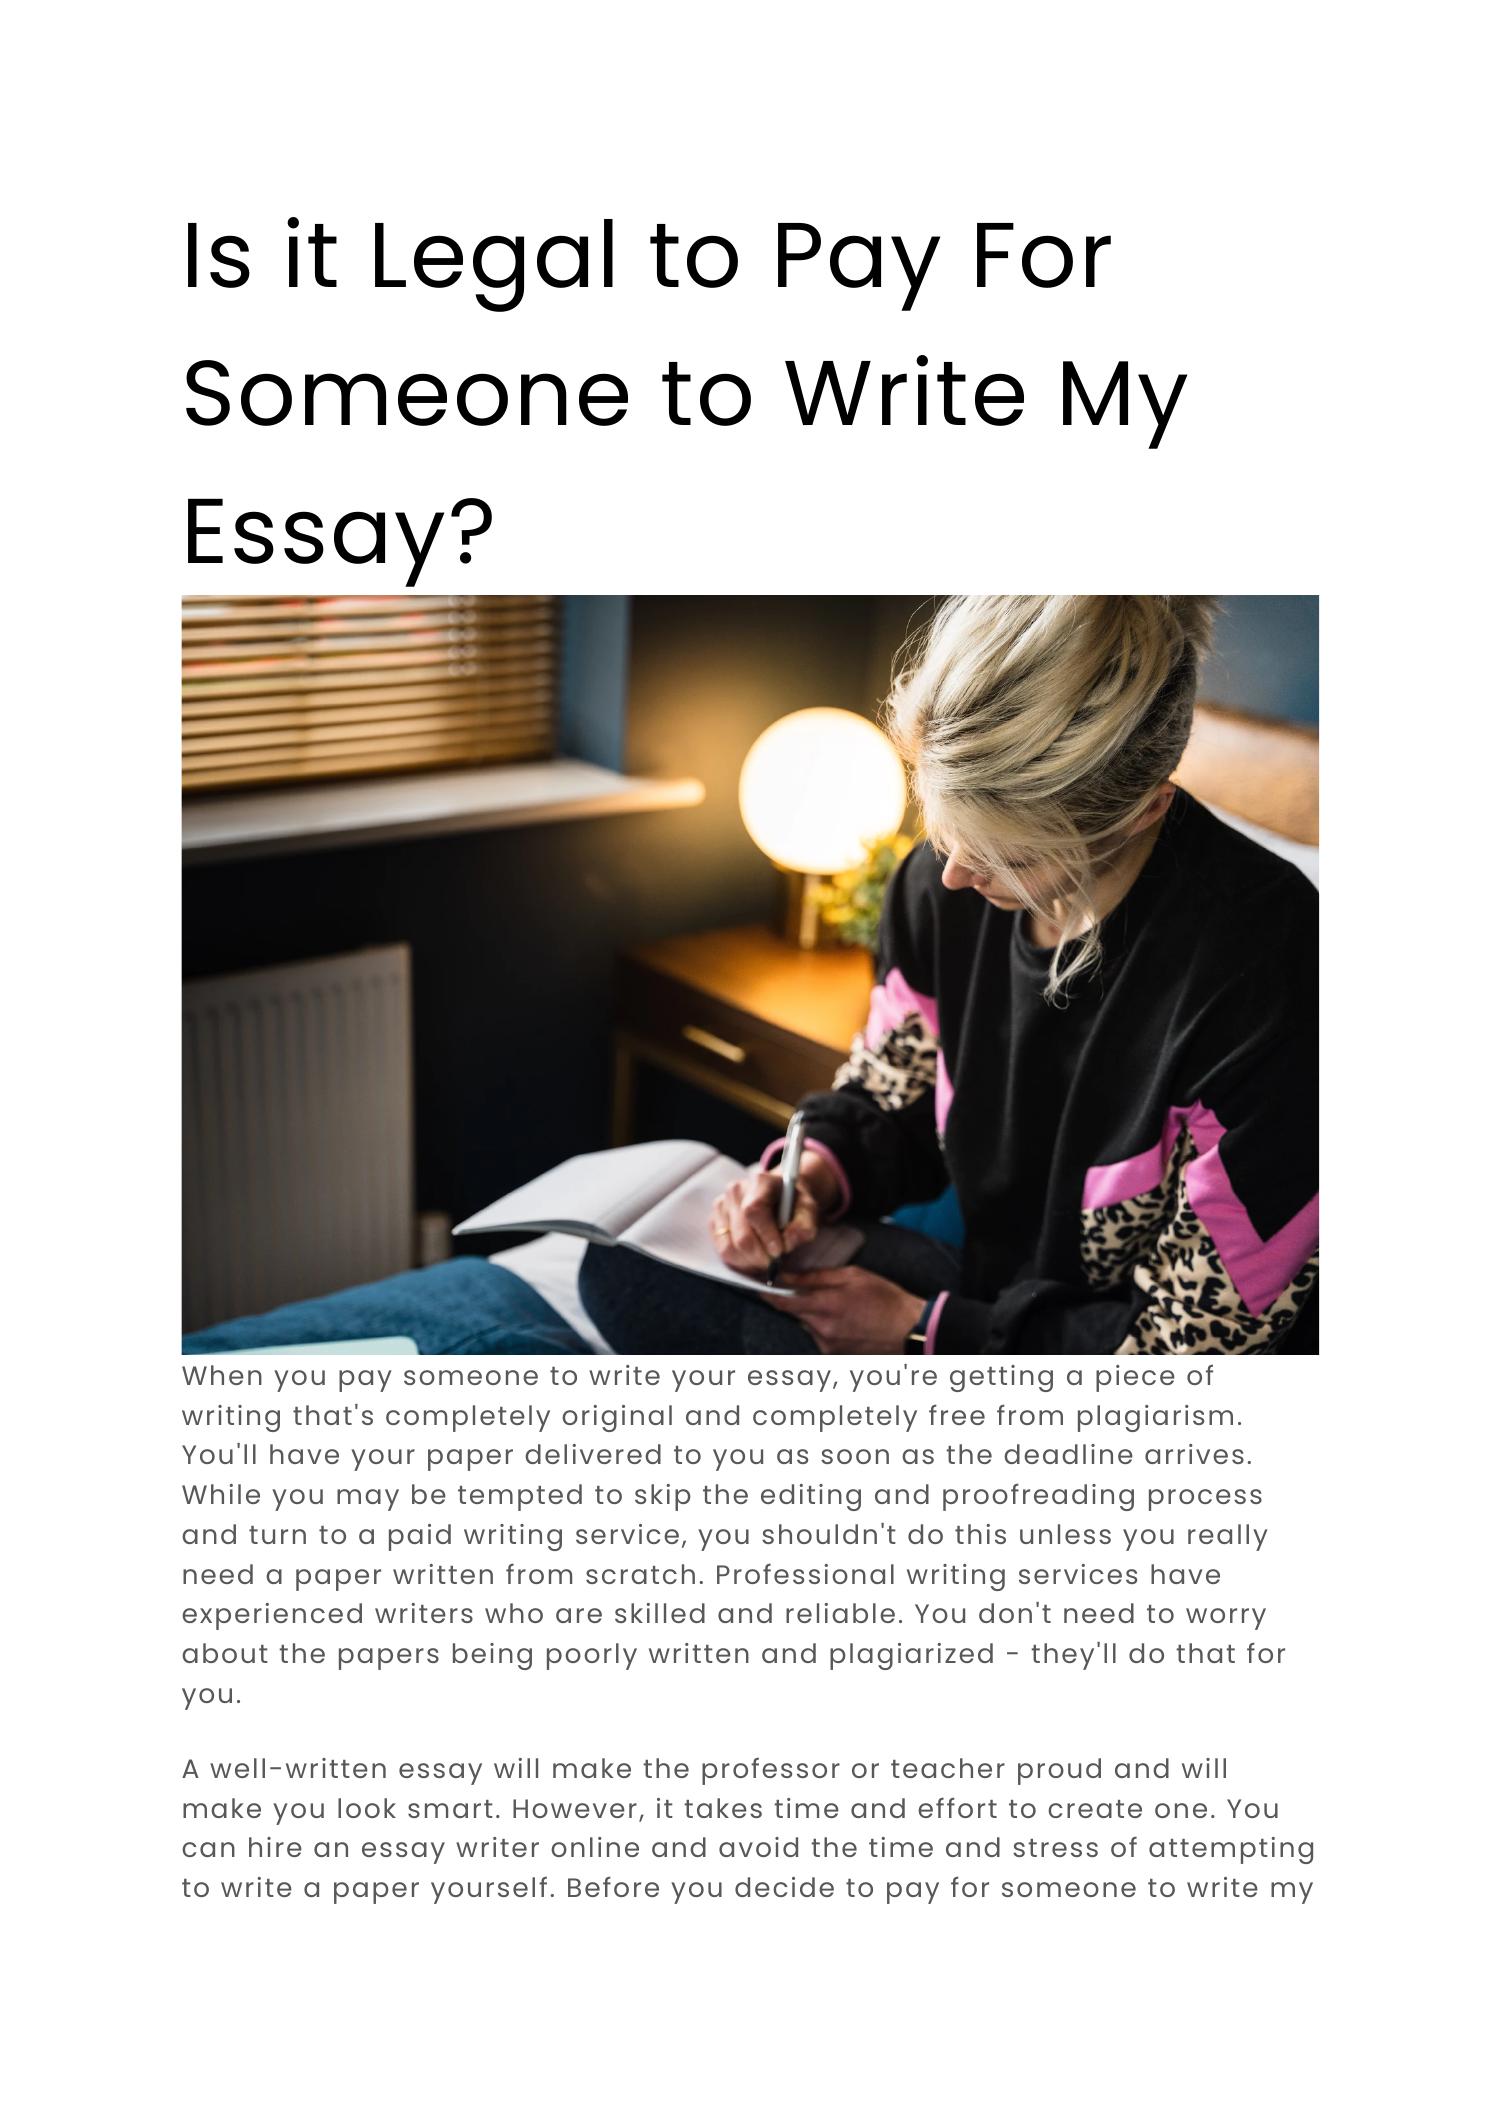 is it bad to pay someone to write your essay